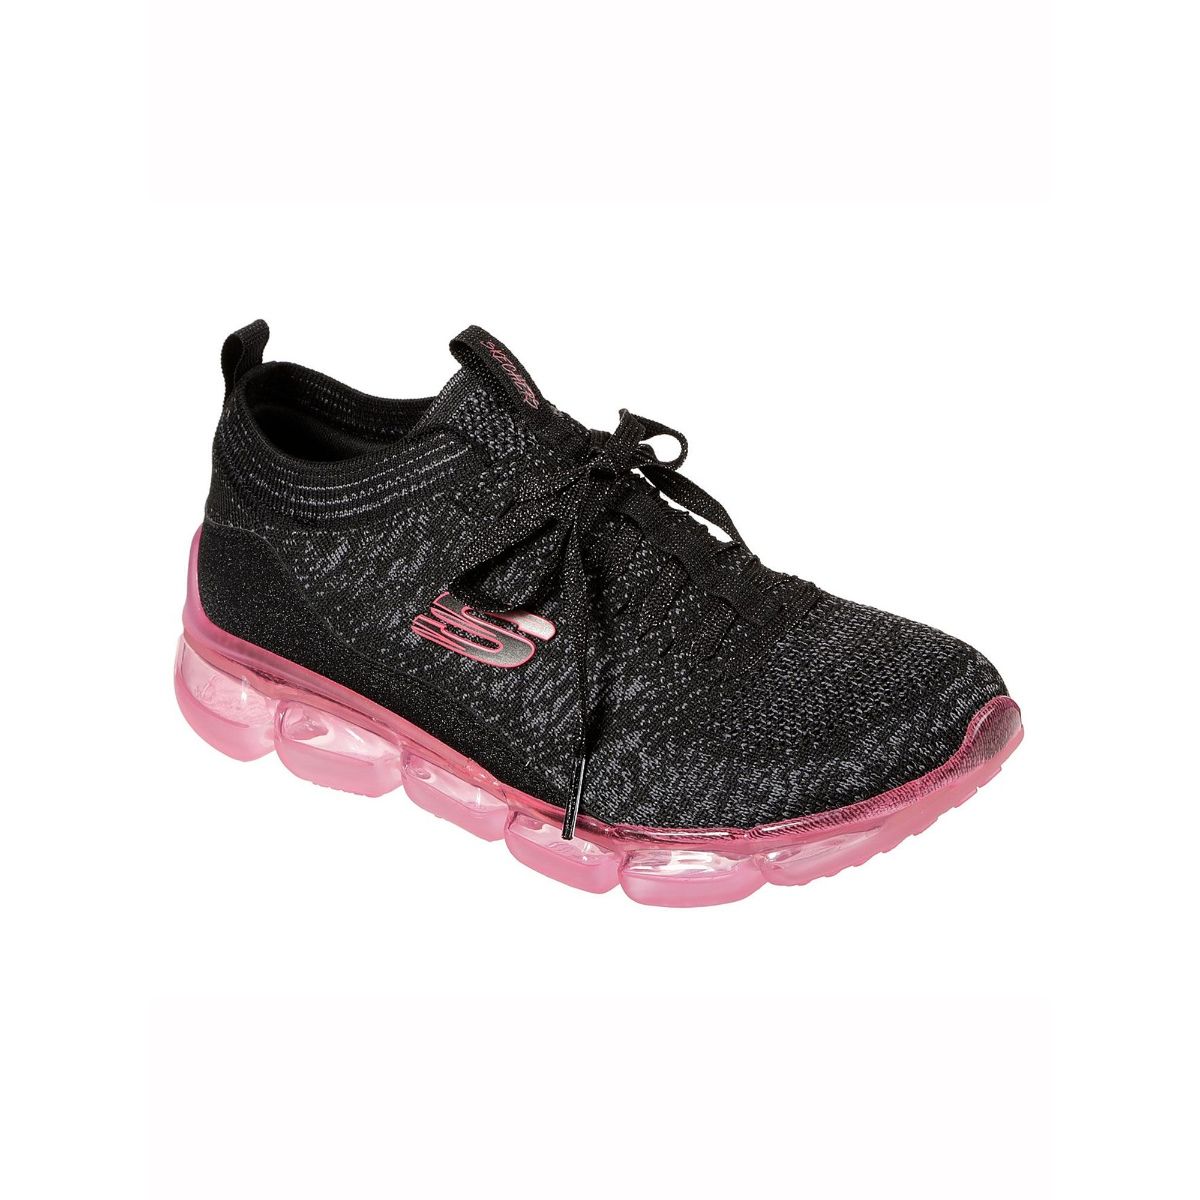 SKECHERS SKECH 92 Black Casual shoes: Buy SKECH AIR 92 Black Casual shoes at Best Price in India Nykaa